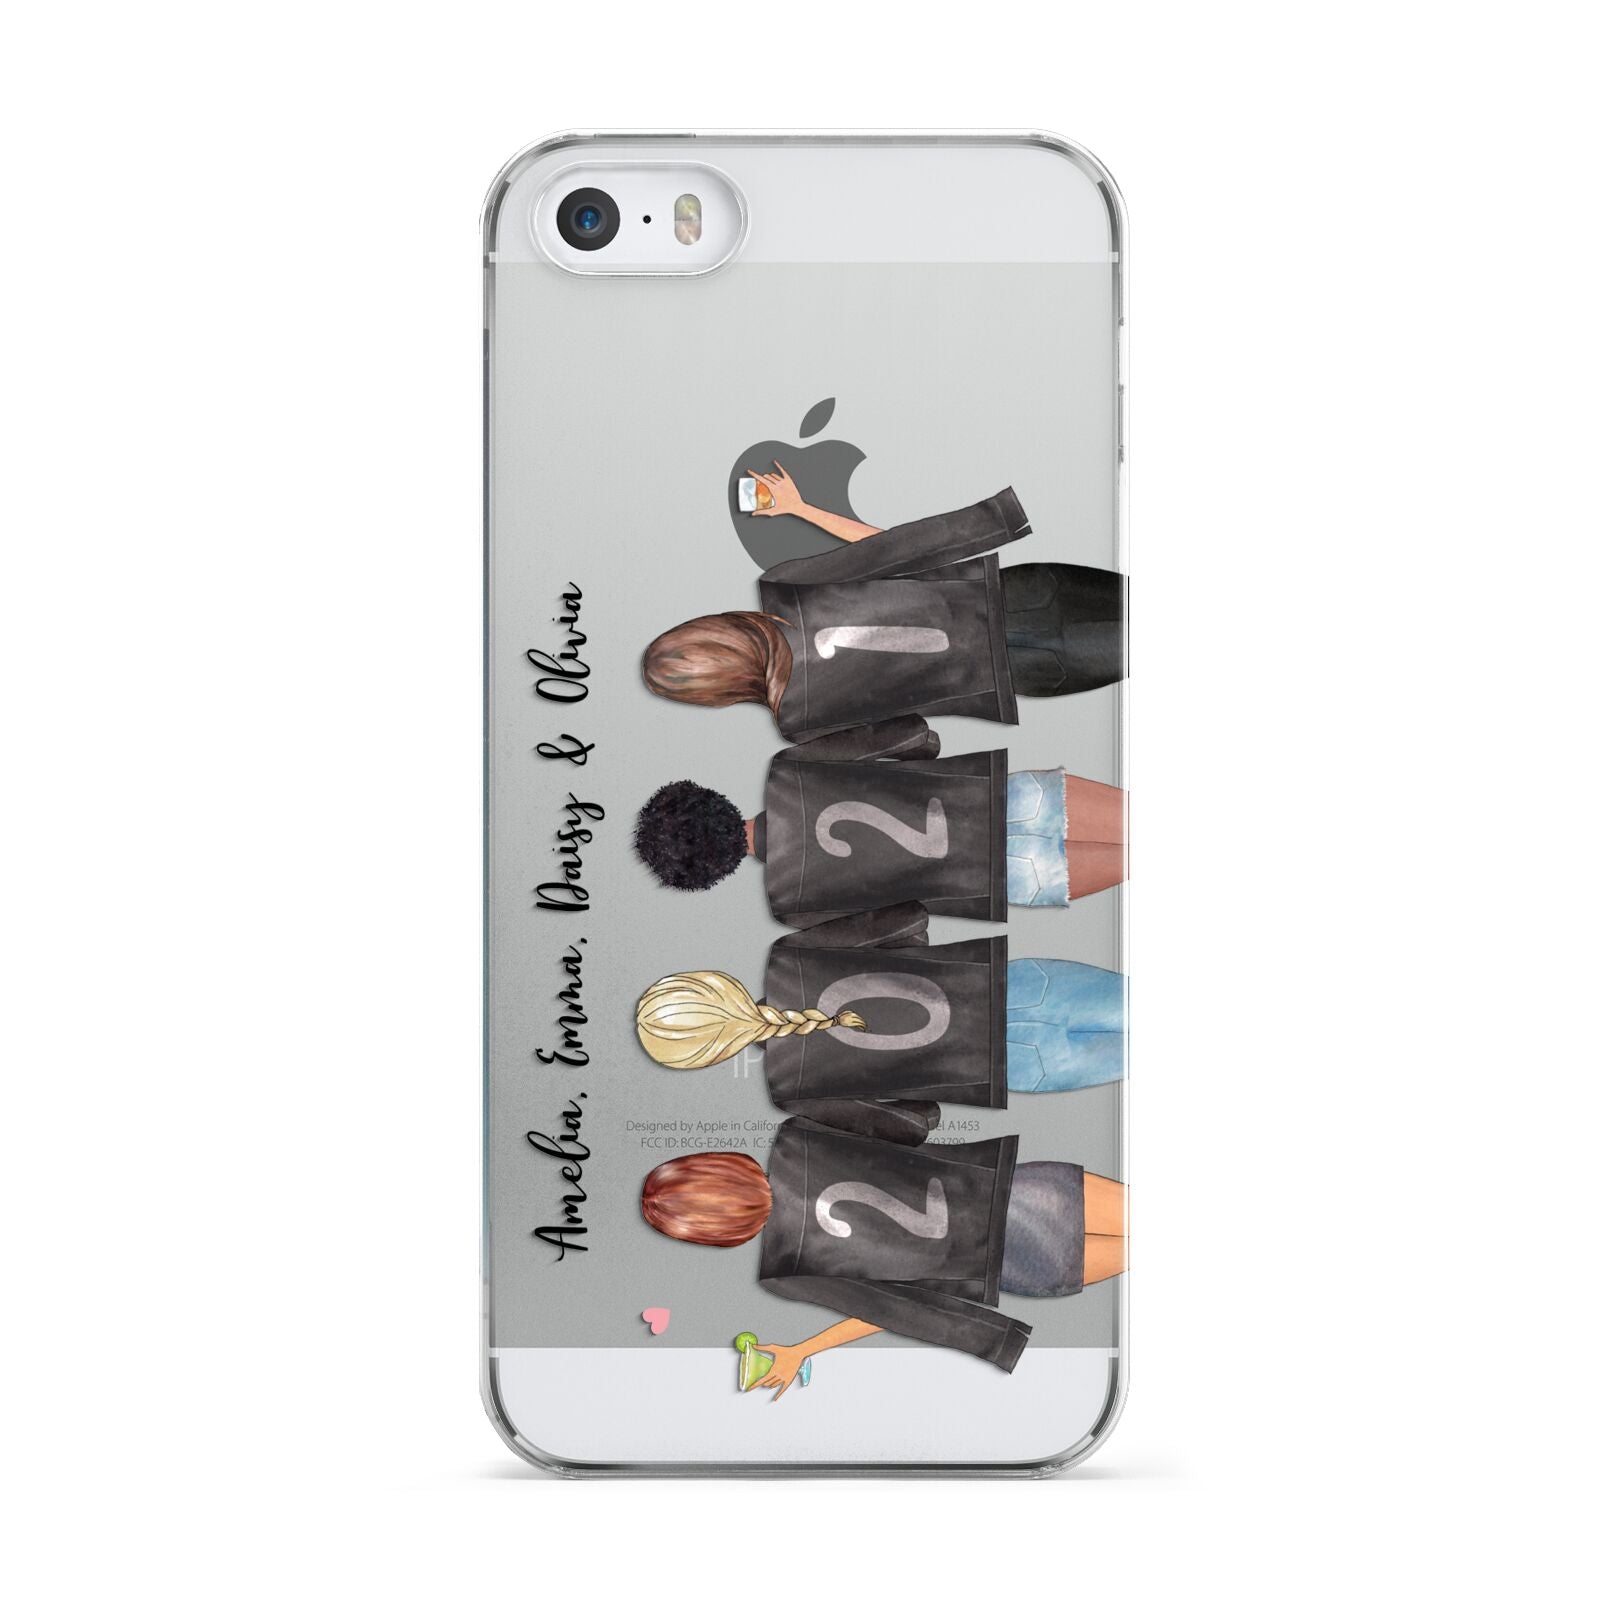 4 Best Friends with Names Apple iPhone 5 Case